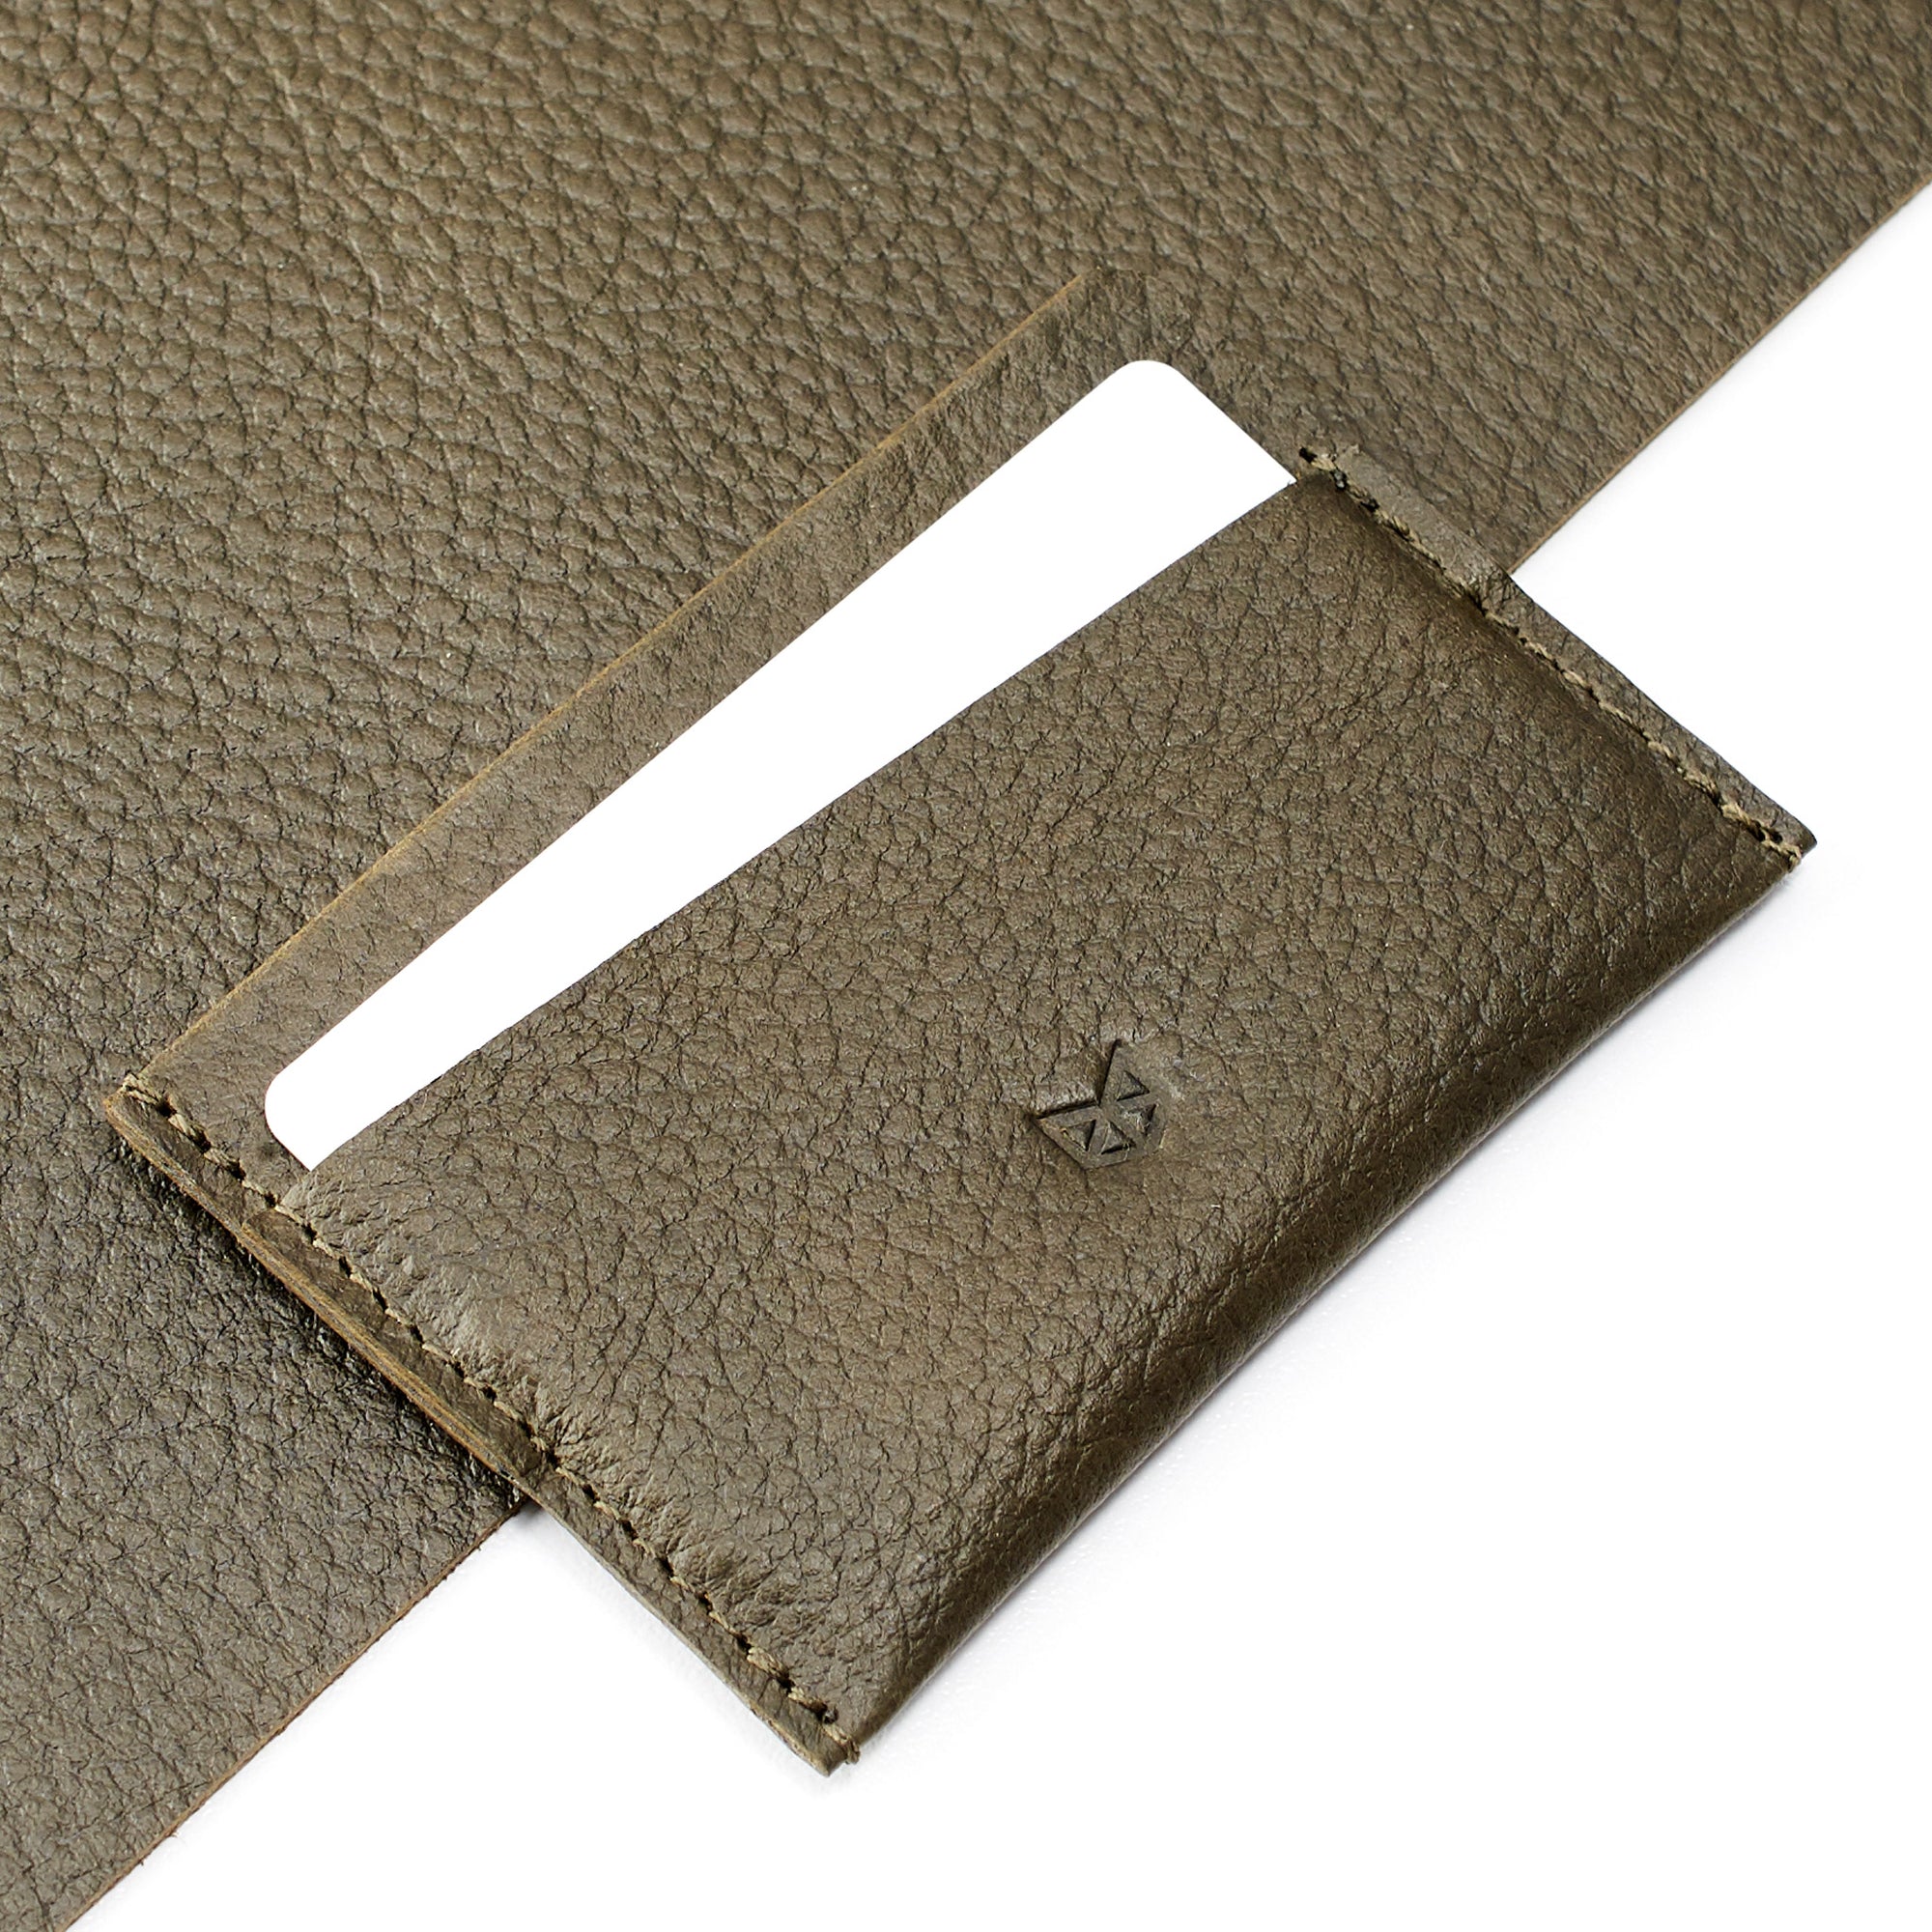 Green leather handmade card holder that fits up to 6 cards